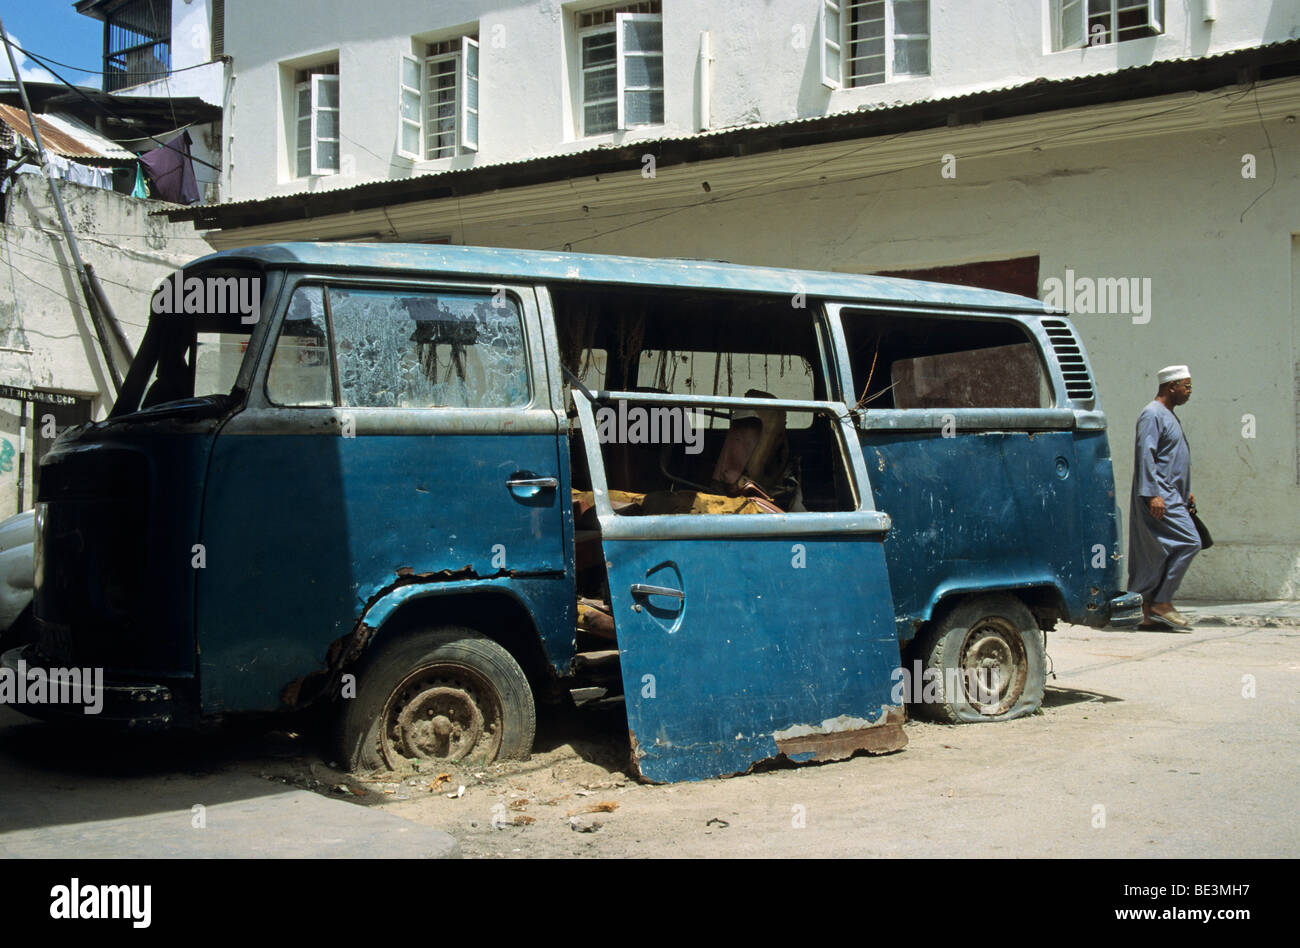 Old VW bus, also known as 'Bully', Mombasa, Kenya, Africa Stock Photo